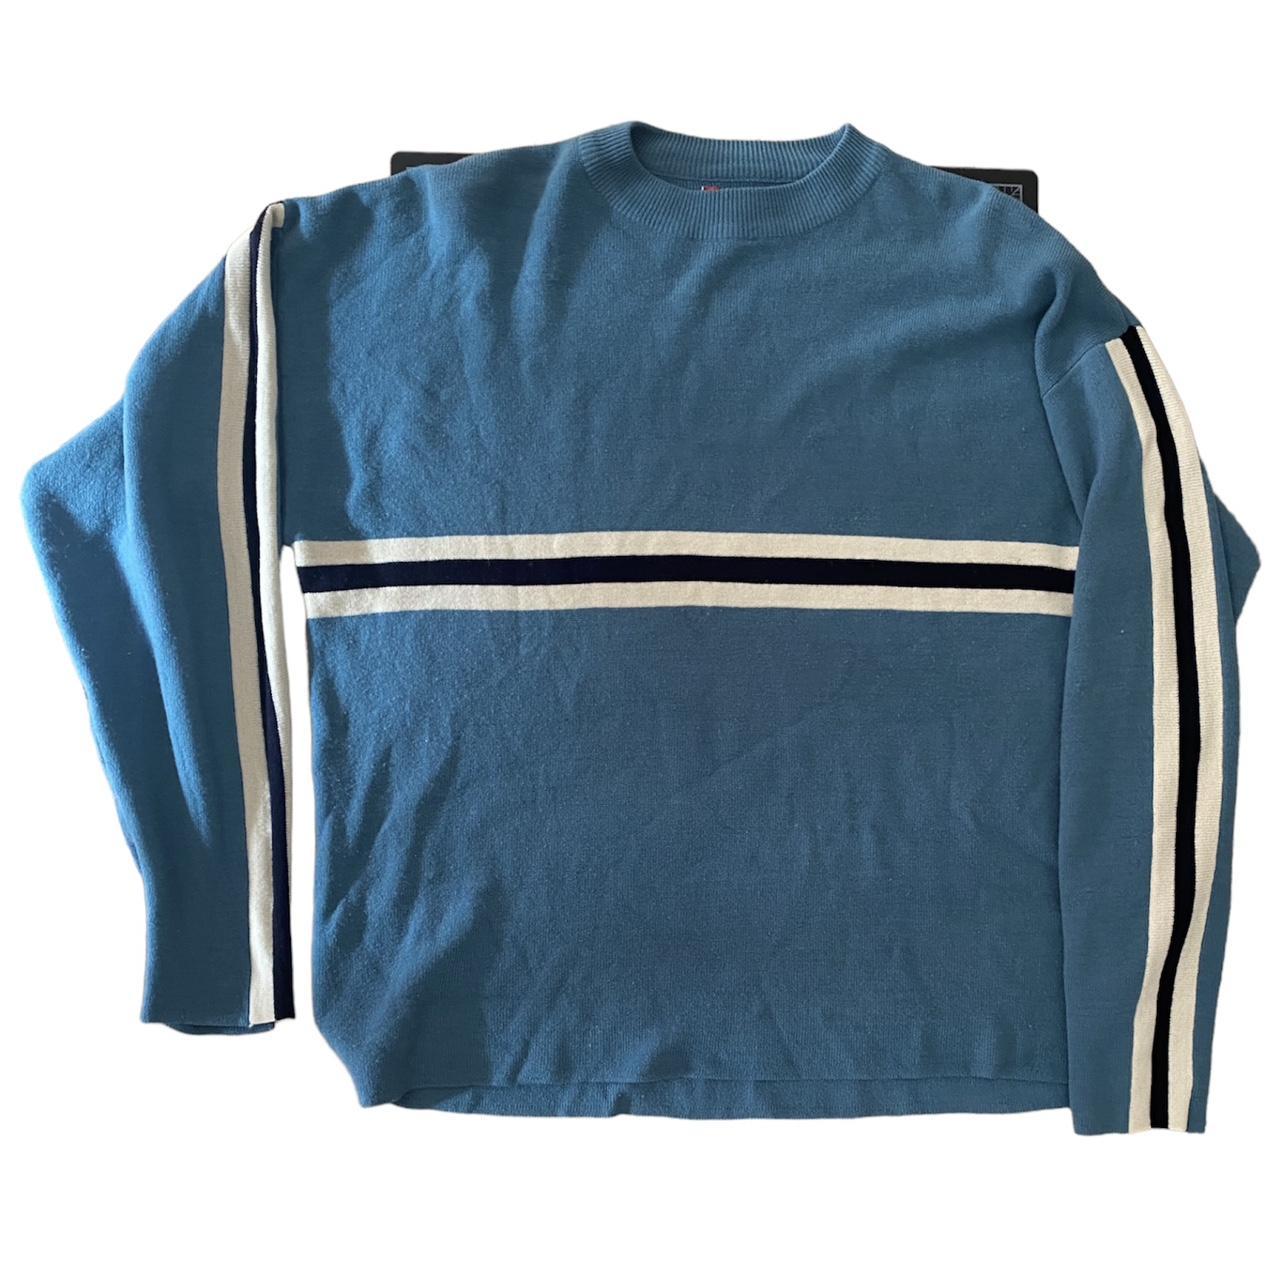 Union Bay Men's Blue and White Jumper